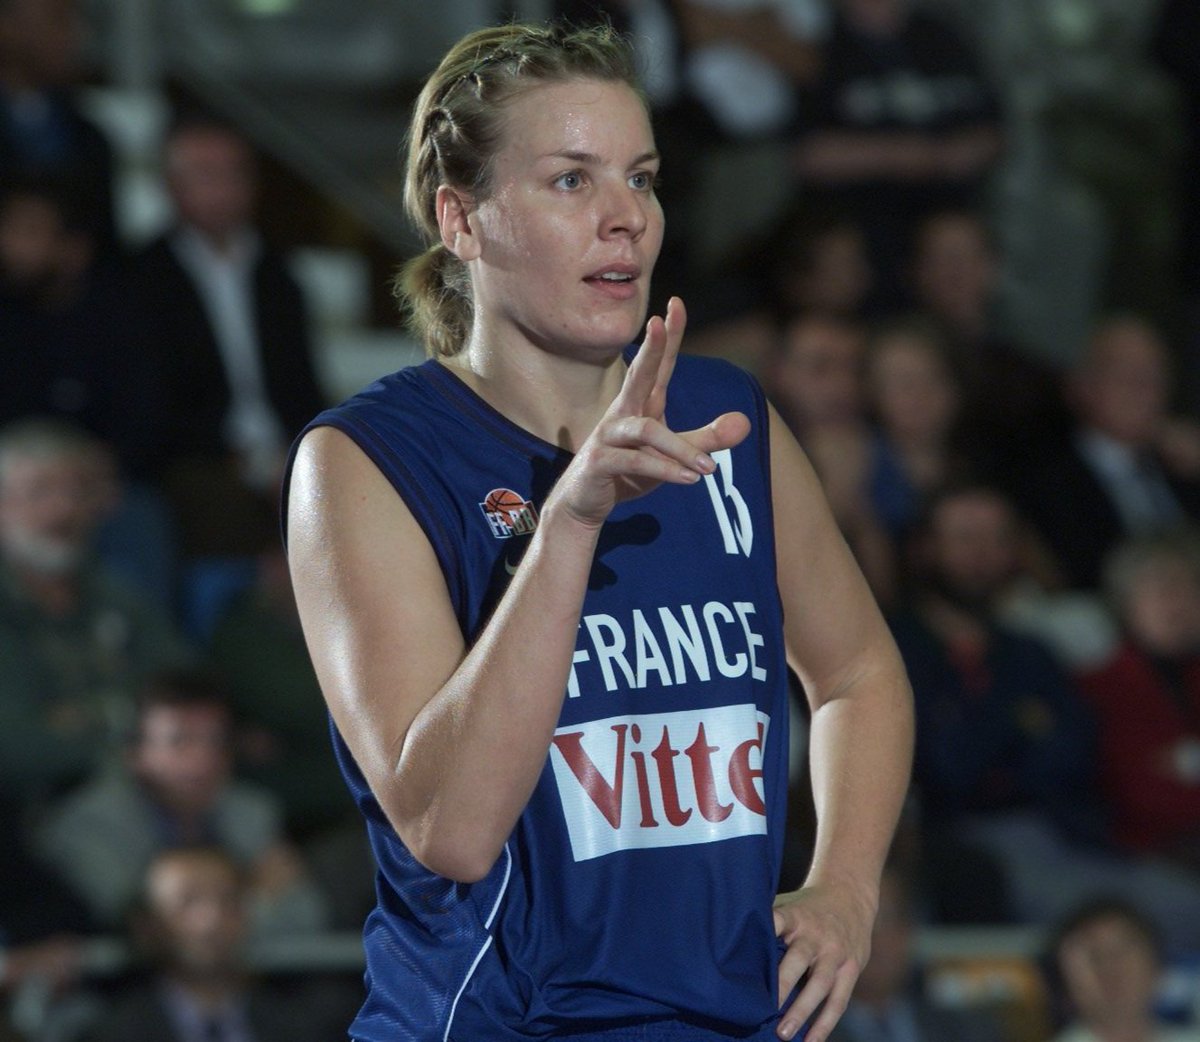 -while Gabby Williams was taken 4th overall by the Chicago Sky in the 2018 WNBA draft, if one includes the Elite draft, Fijalkowski remains the highest drafted French player in WNBA history